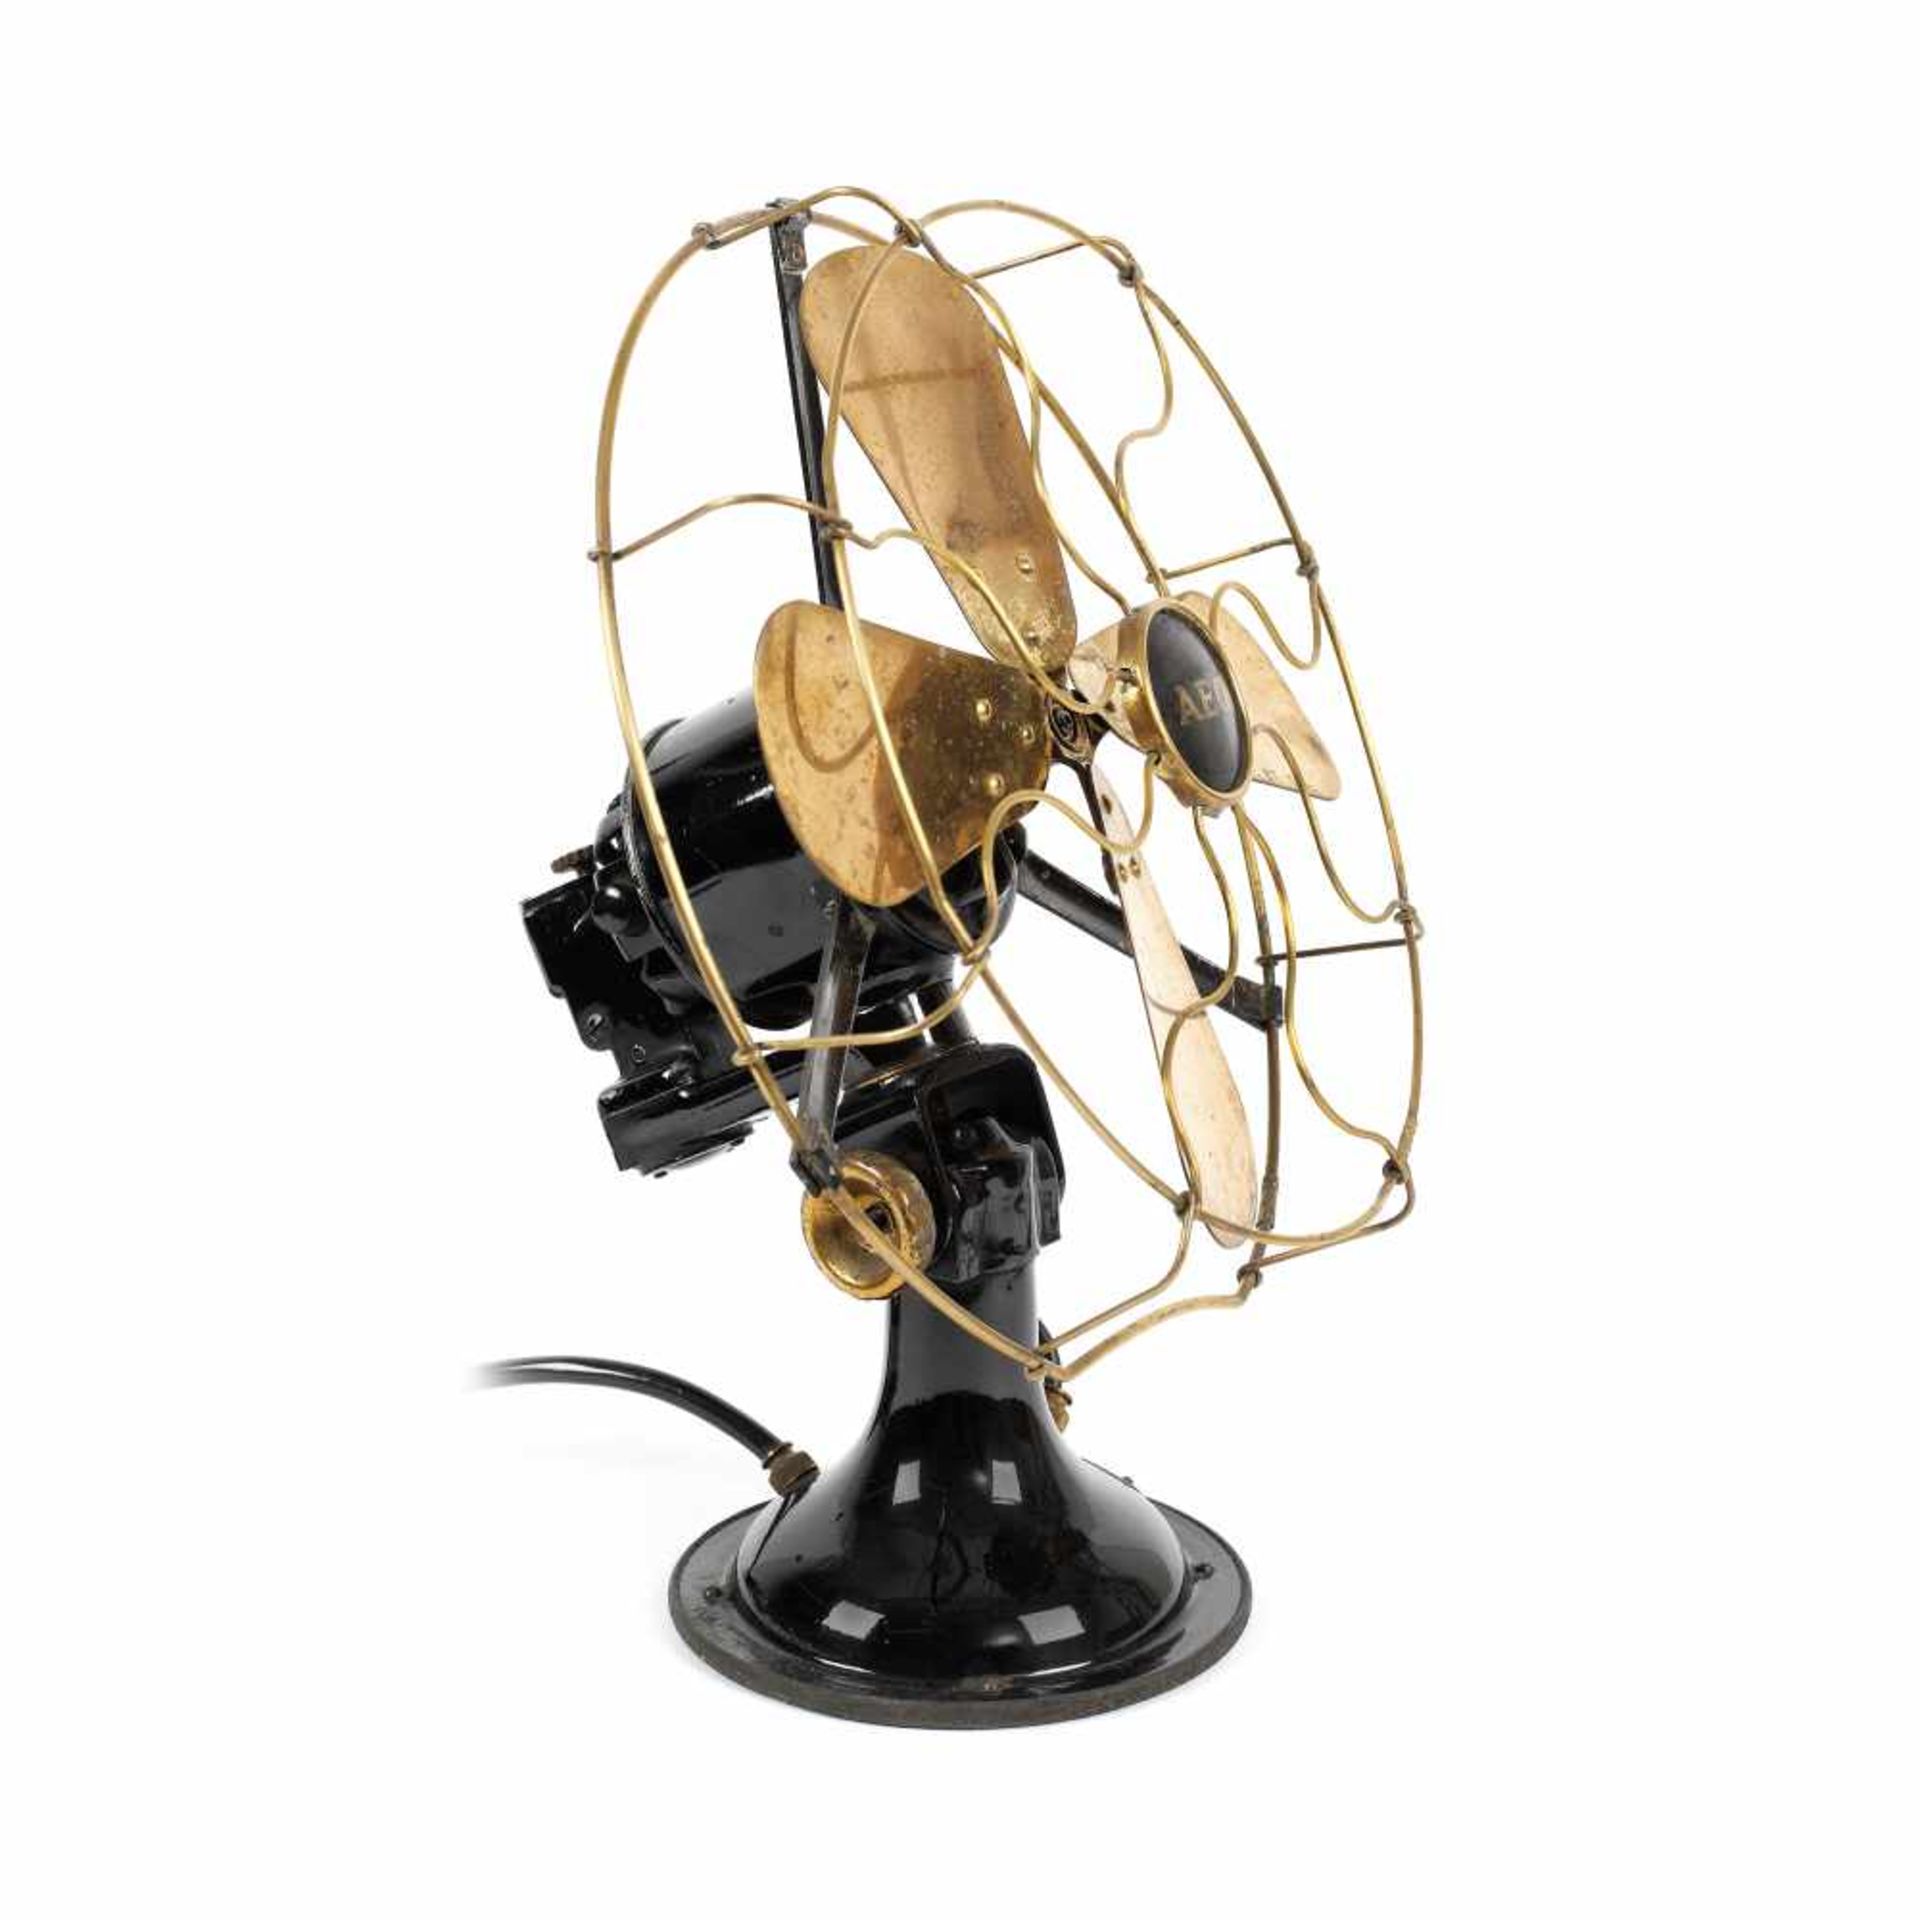 Vintage AEG fan in Art Deco style, designed by Peter Behrens, early 20th century - Image 3 of 3